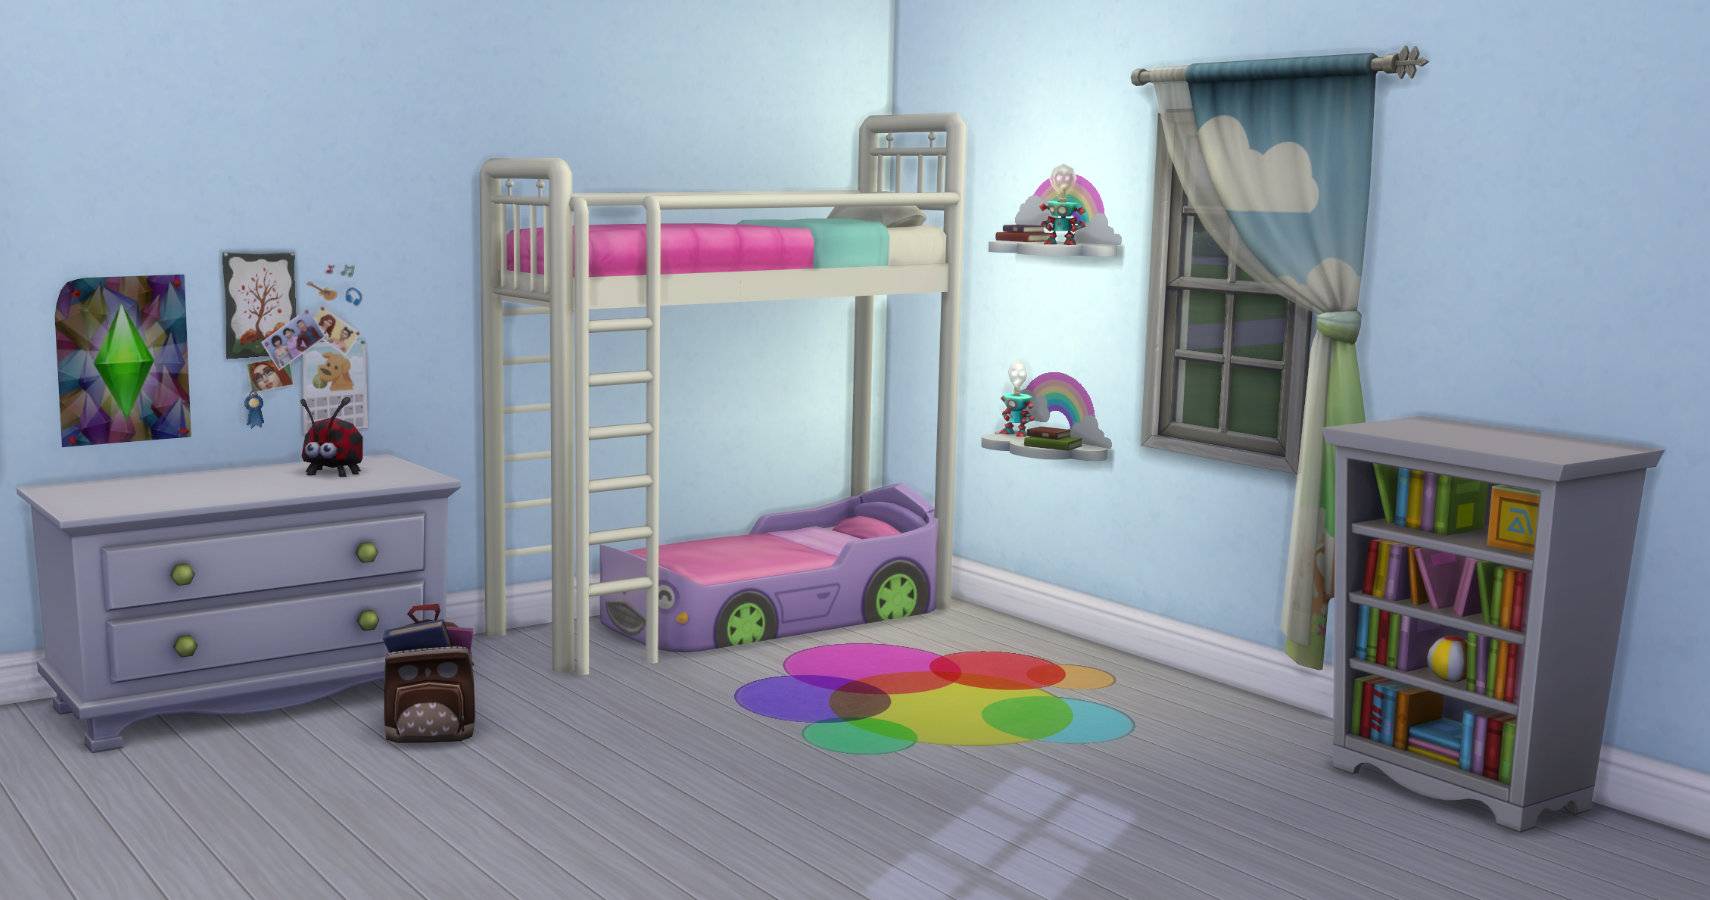 The Sims 4 Everything You Need To Know, Toddler Bunk Beds Sims 4